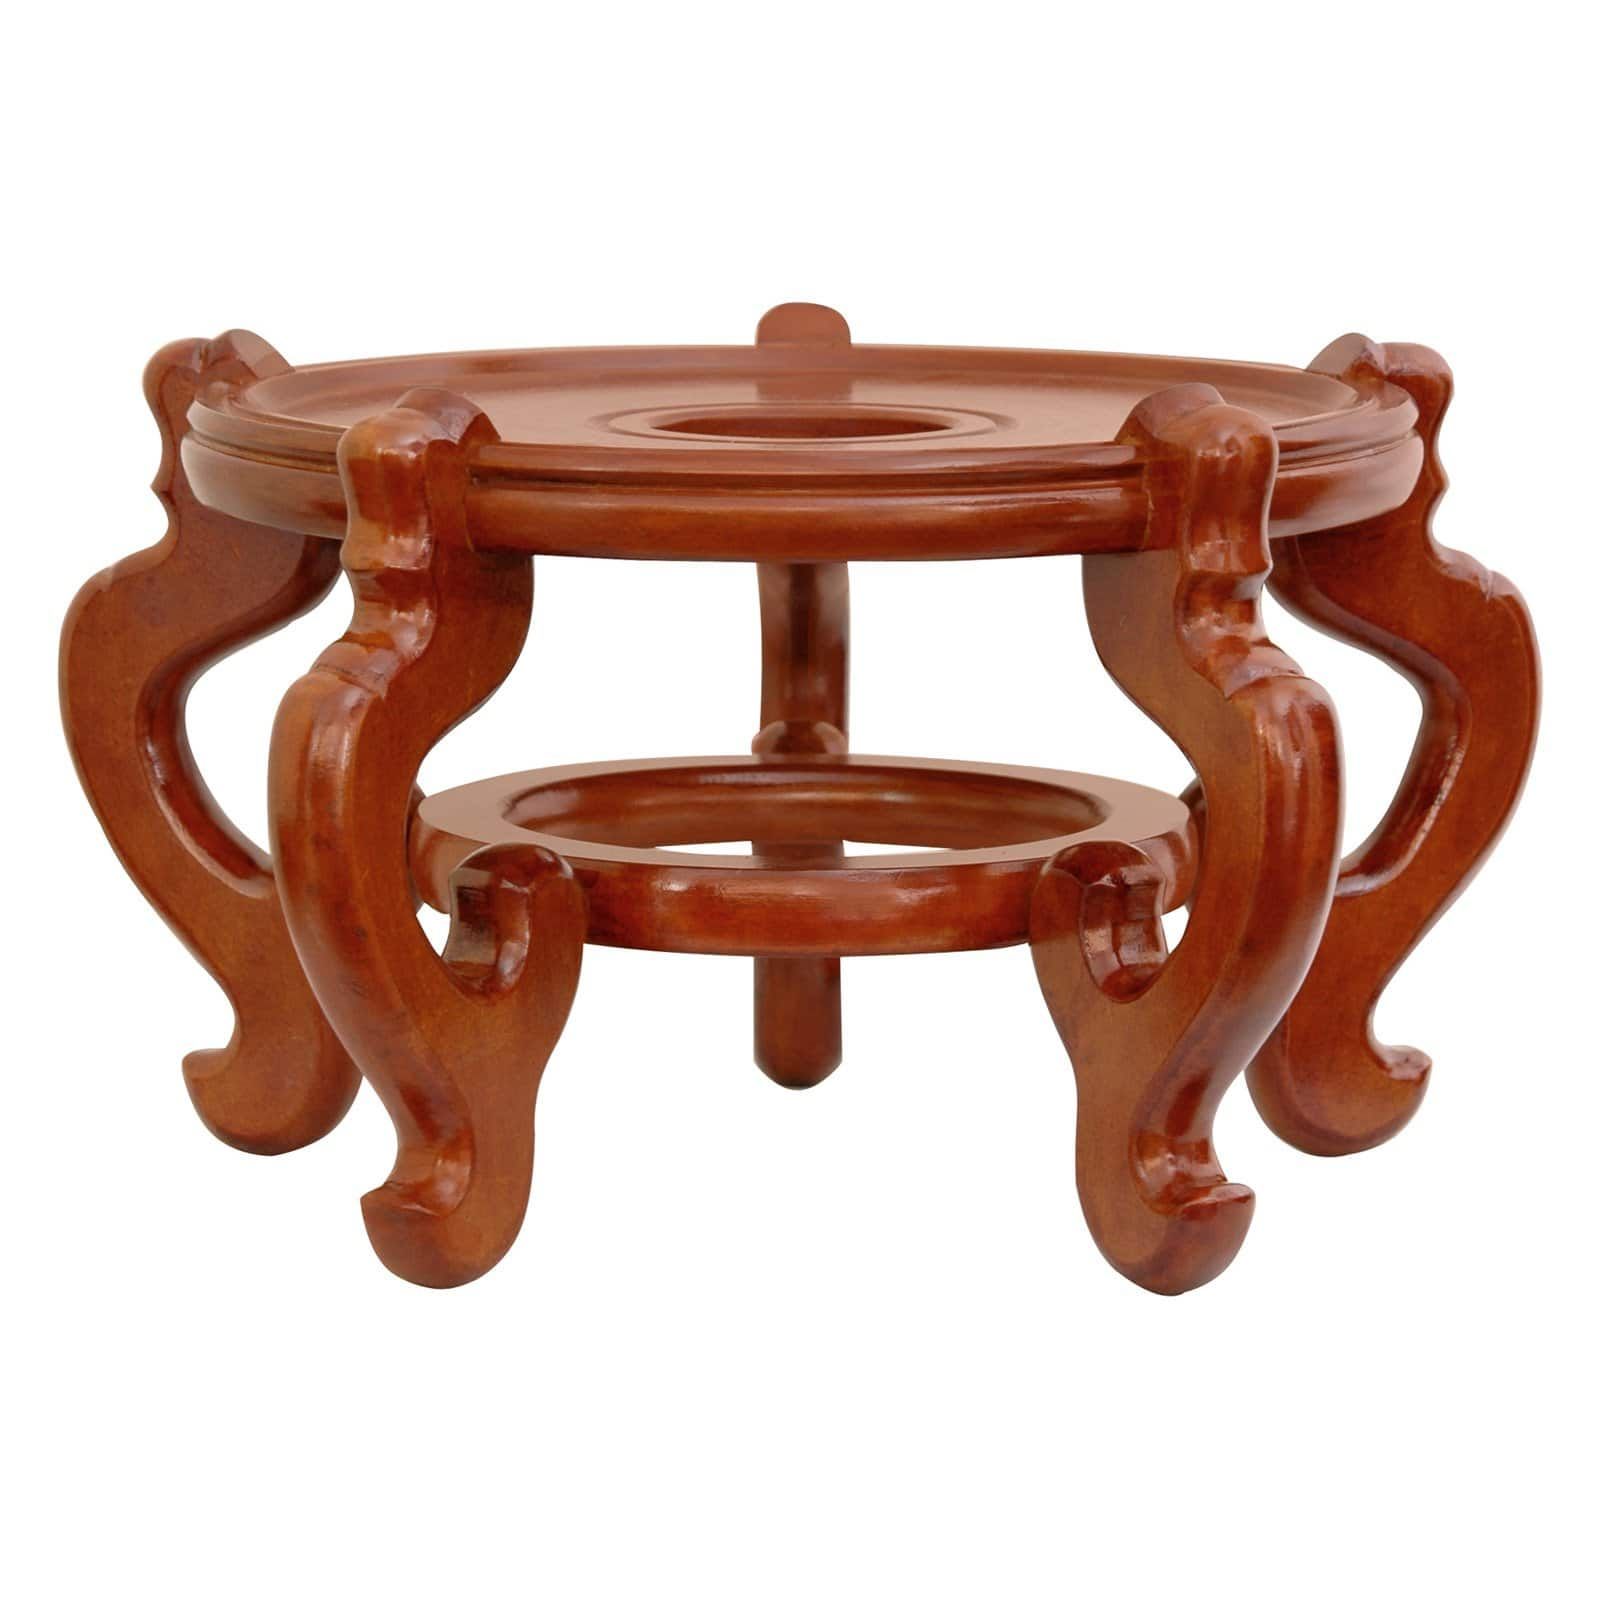 Oriental Furniture Rosewood Fishbowl Stand, Honey – Walmart Pertaining To Fishbowl Plant Stands (View 1 of 15)